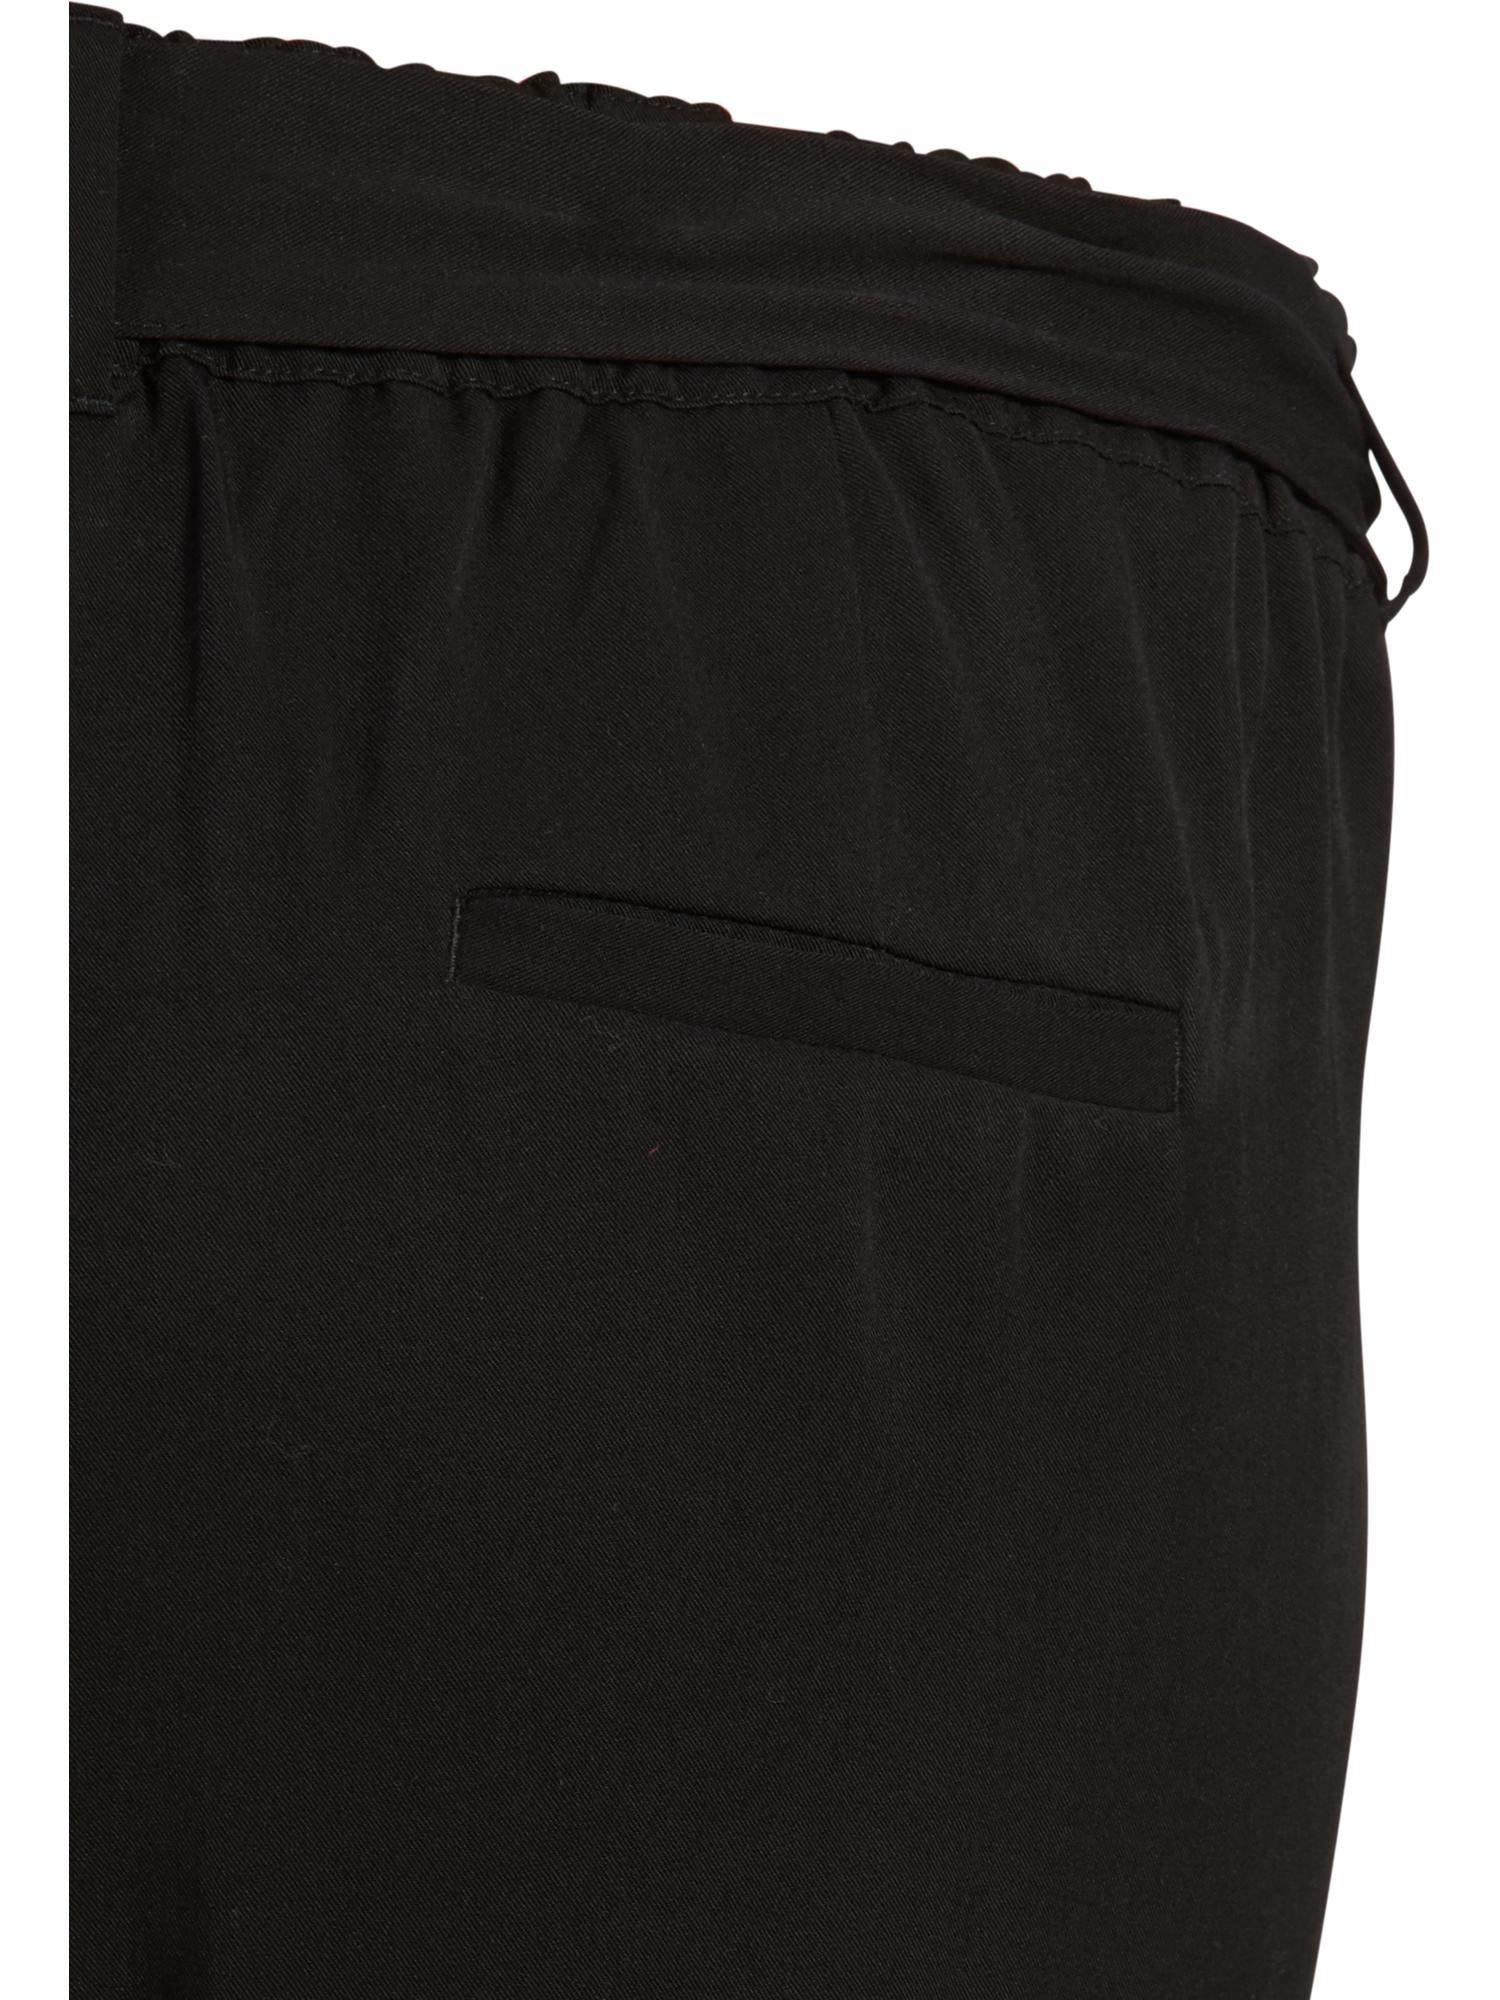 Women's Plus Belted Soft Pants | Old Navy